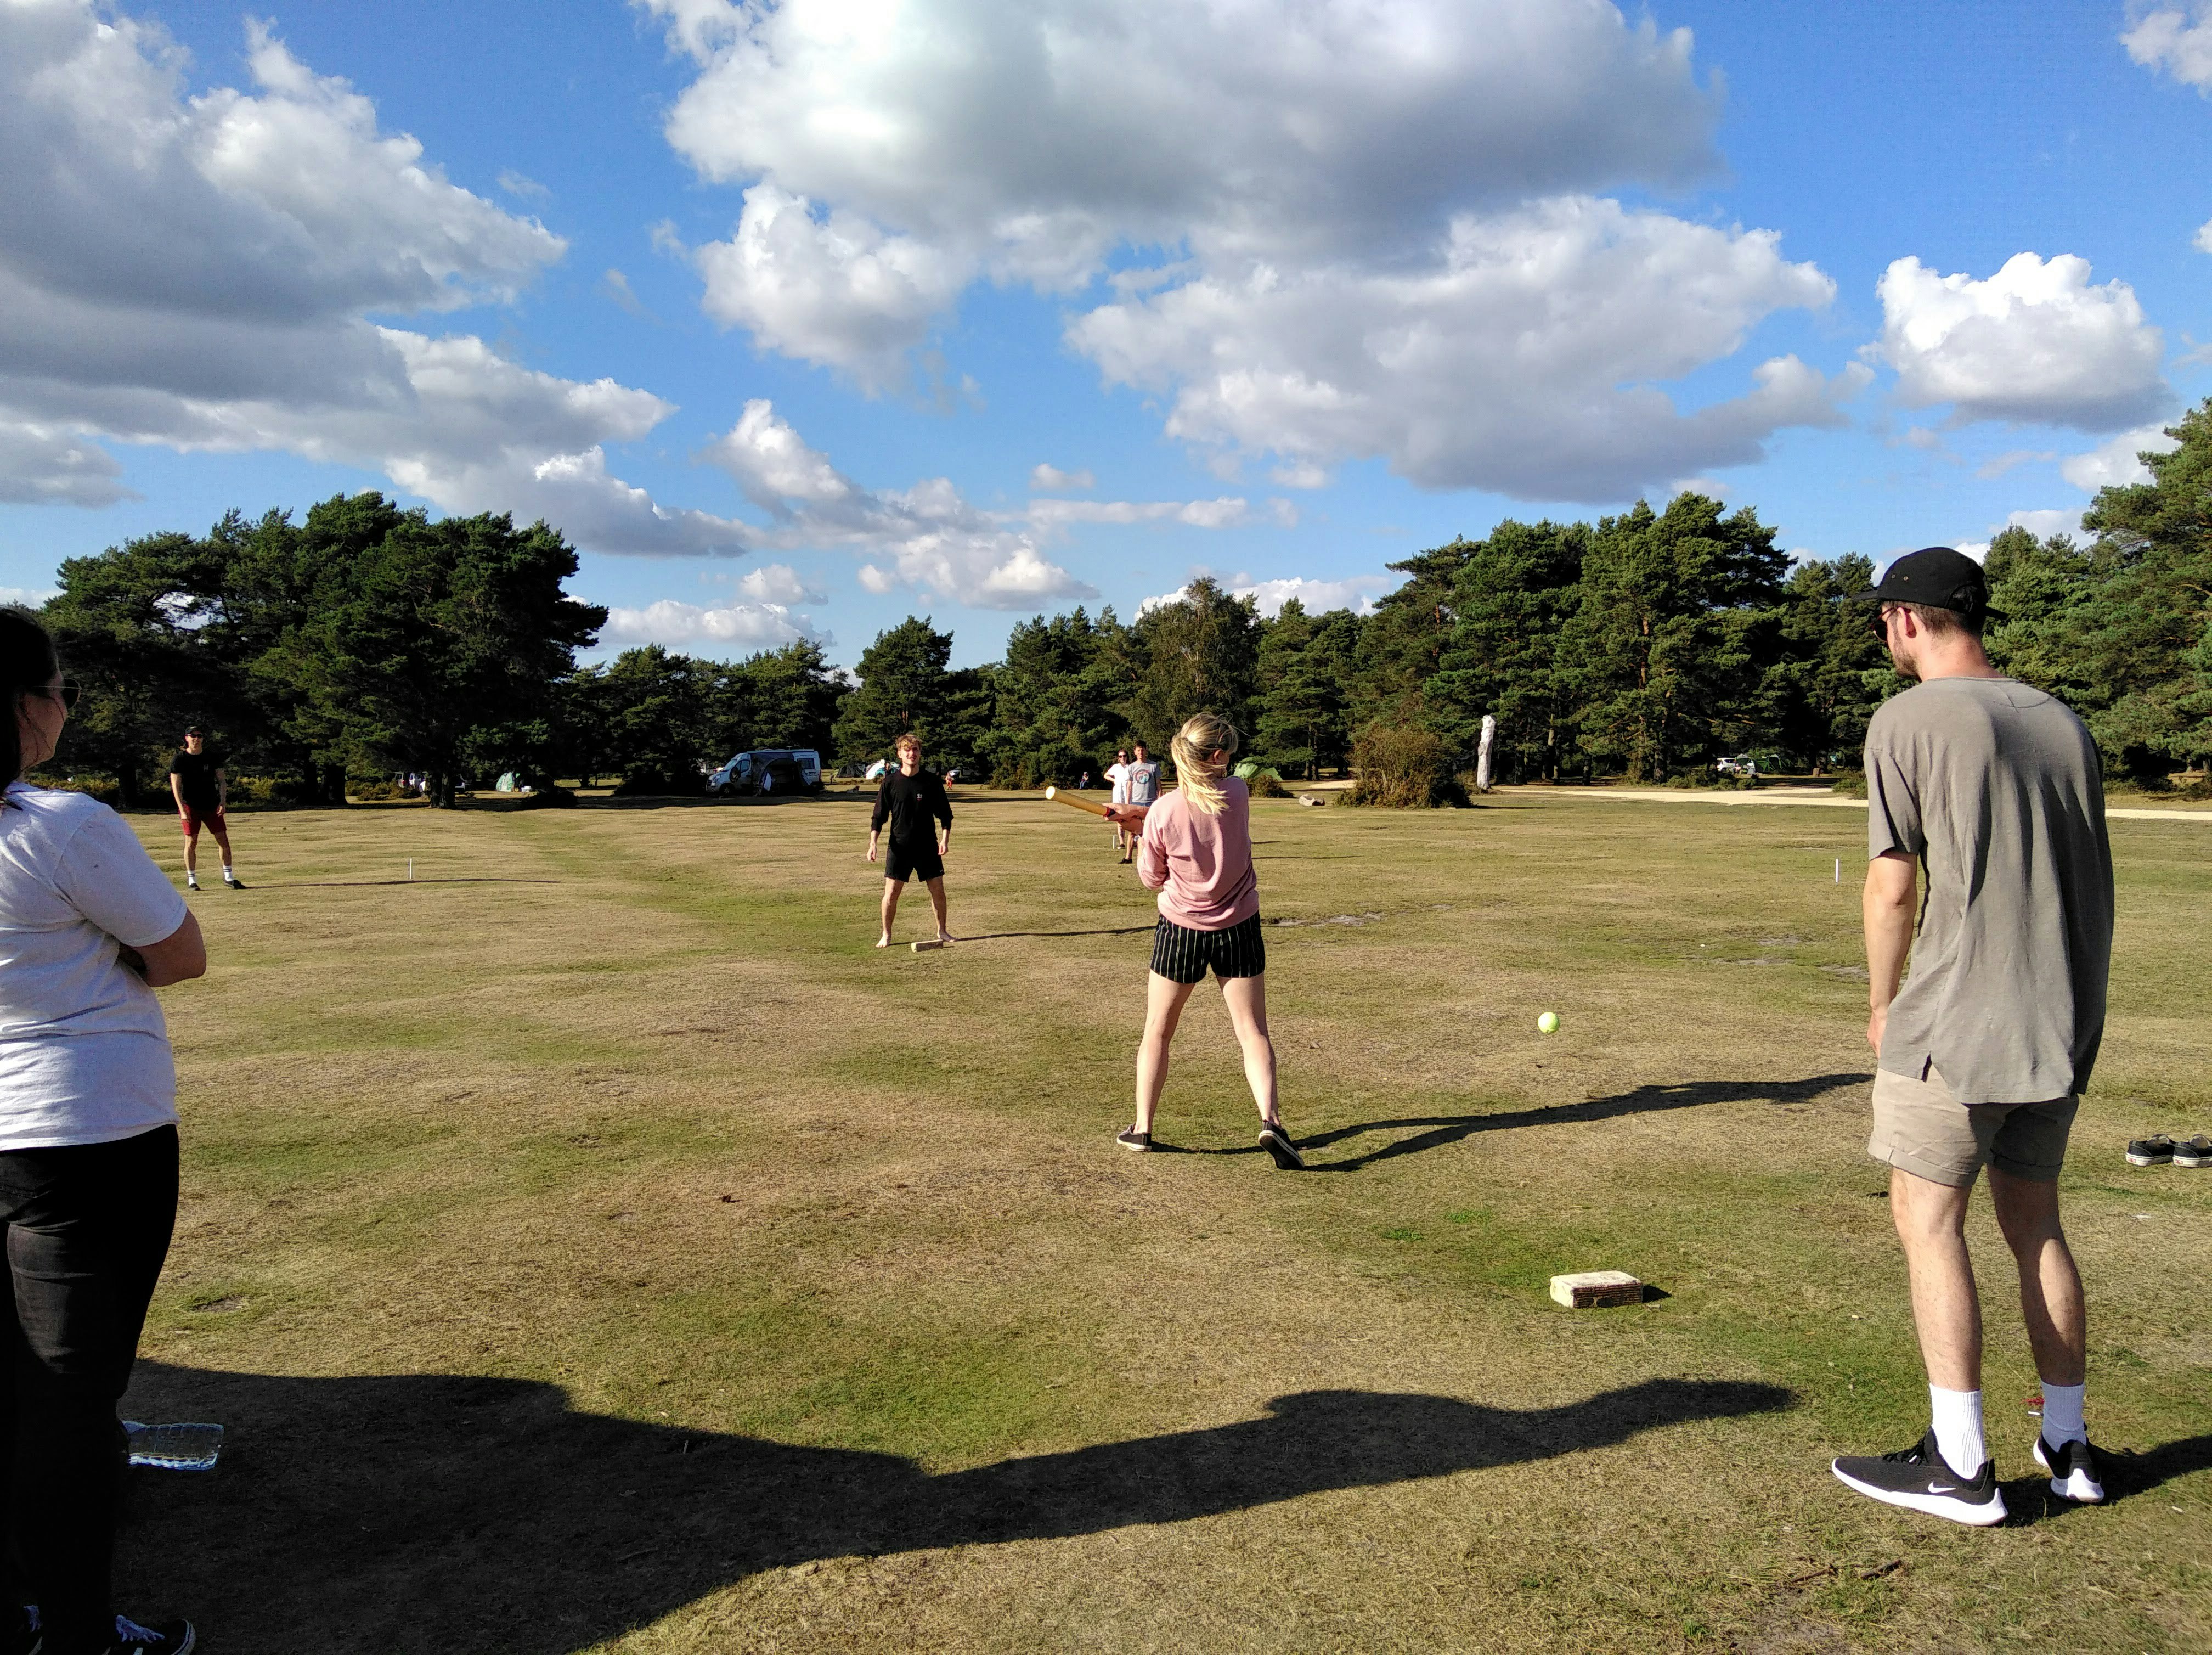 The group play rounders on a sunny day. New Forest spending diary